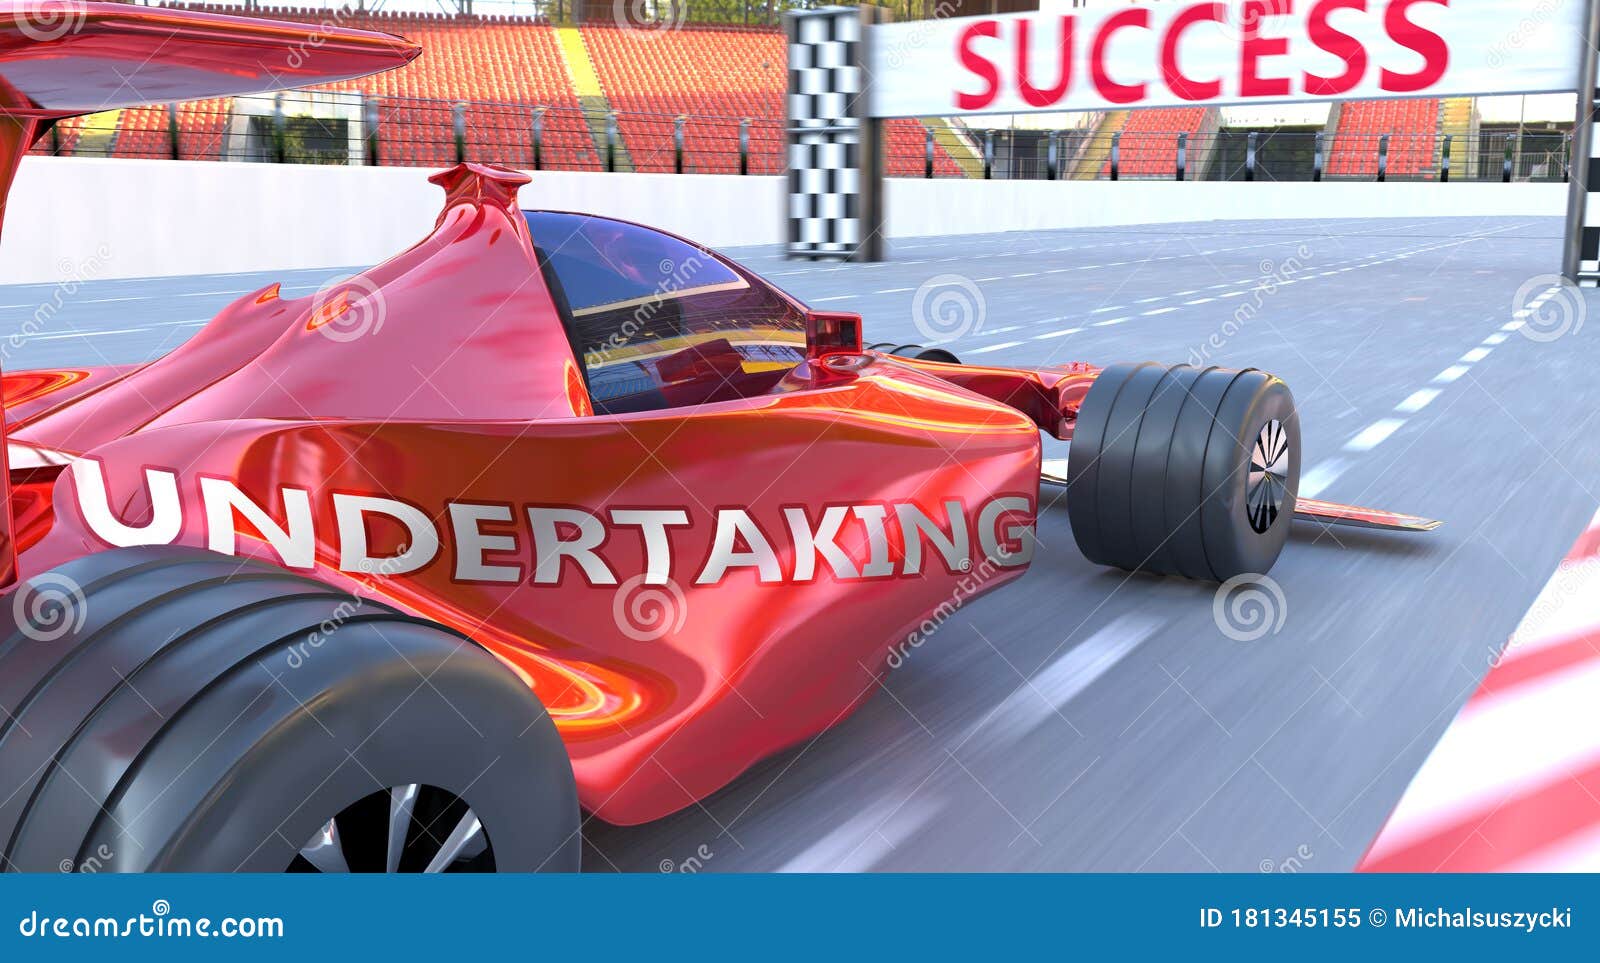 undertaking and success - pictured as word undertaking and a f1 car, to ize that undertaking can help achieving success and